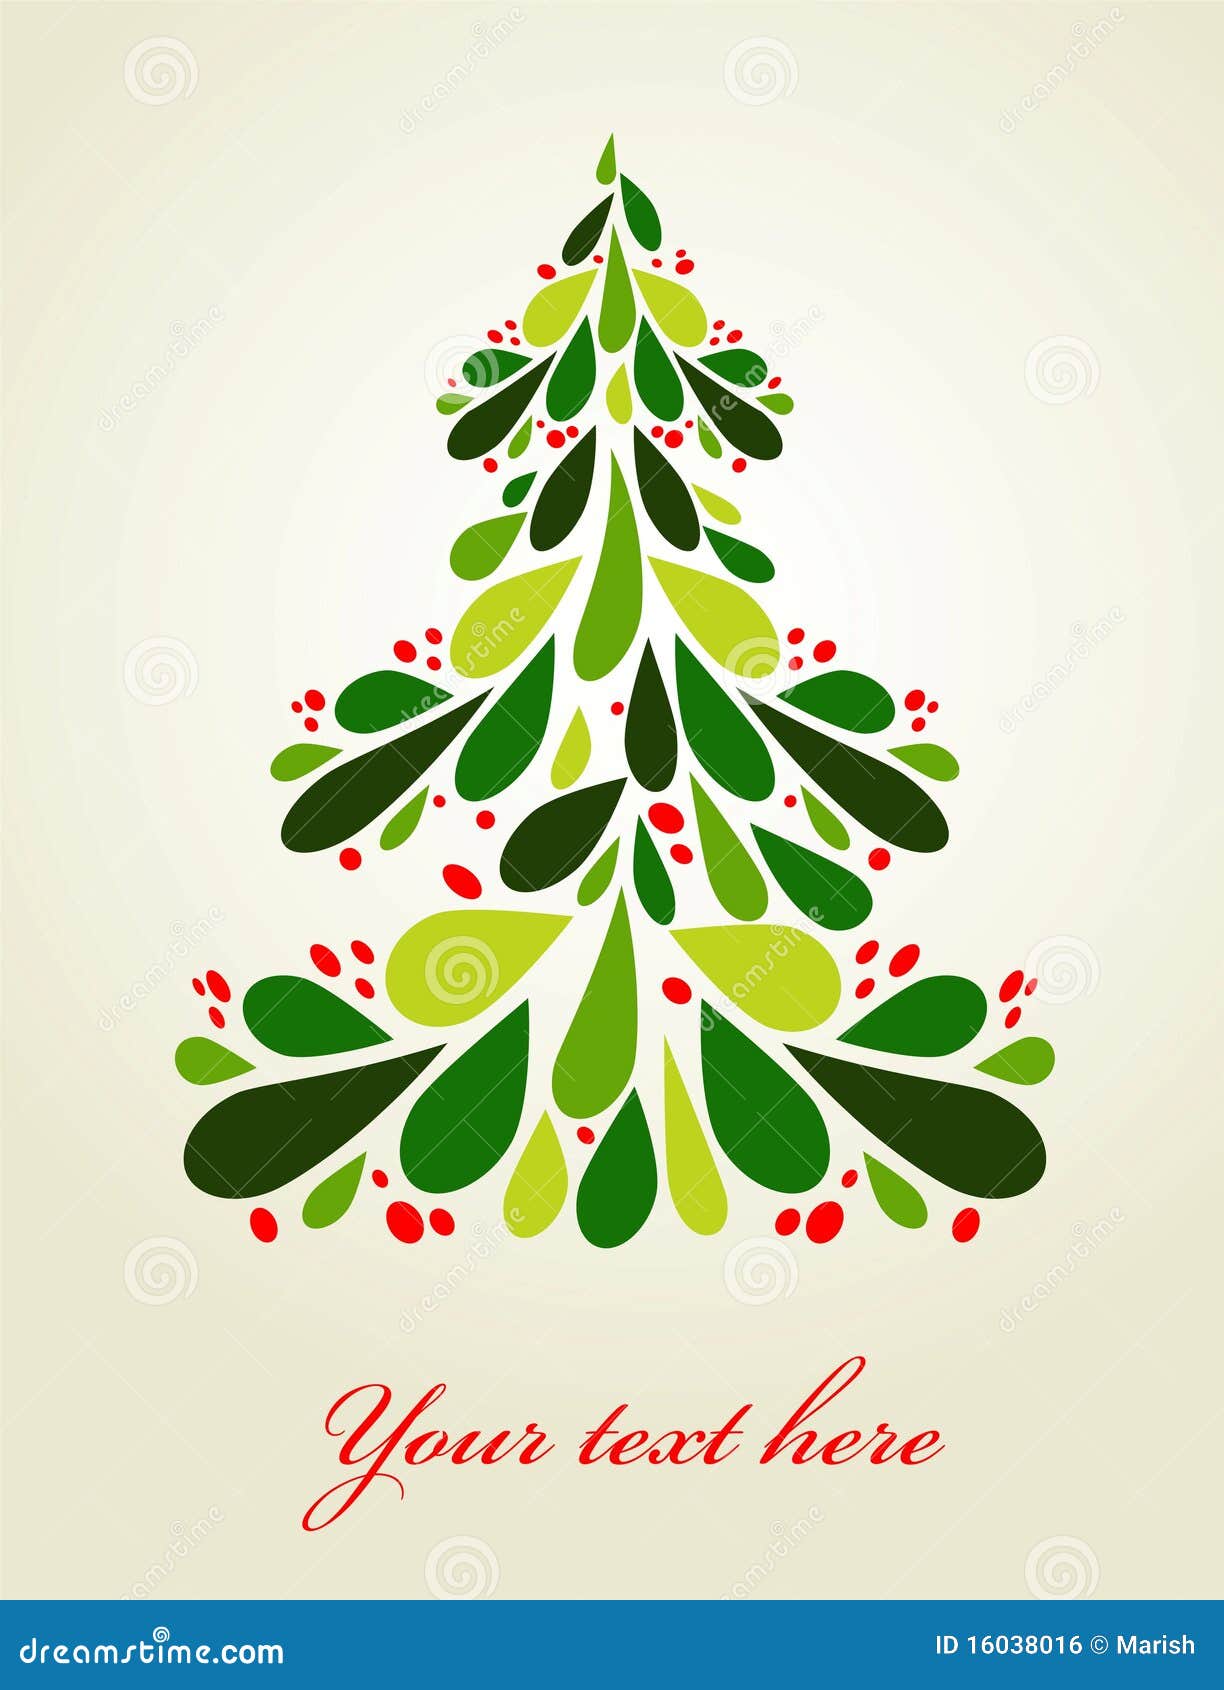 Cute Christmas background stock vector. Illustration of shape - 16038016